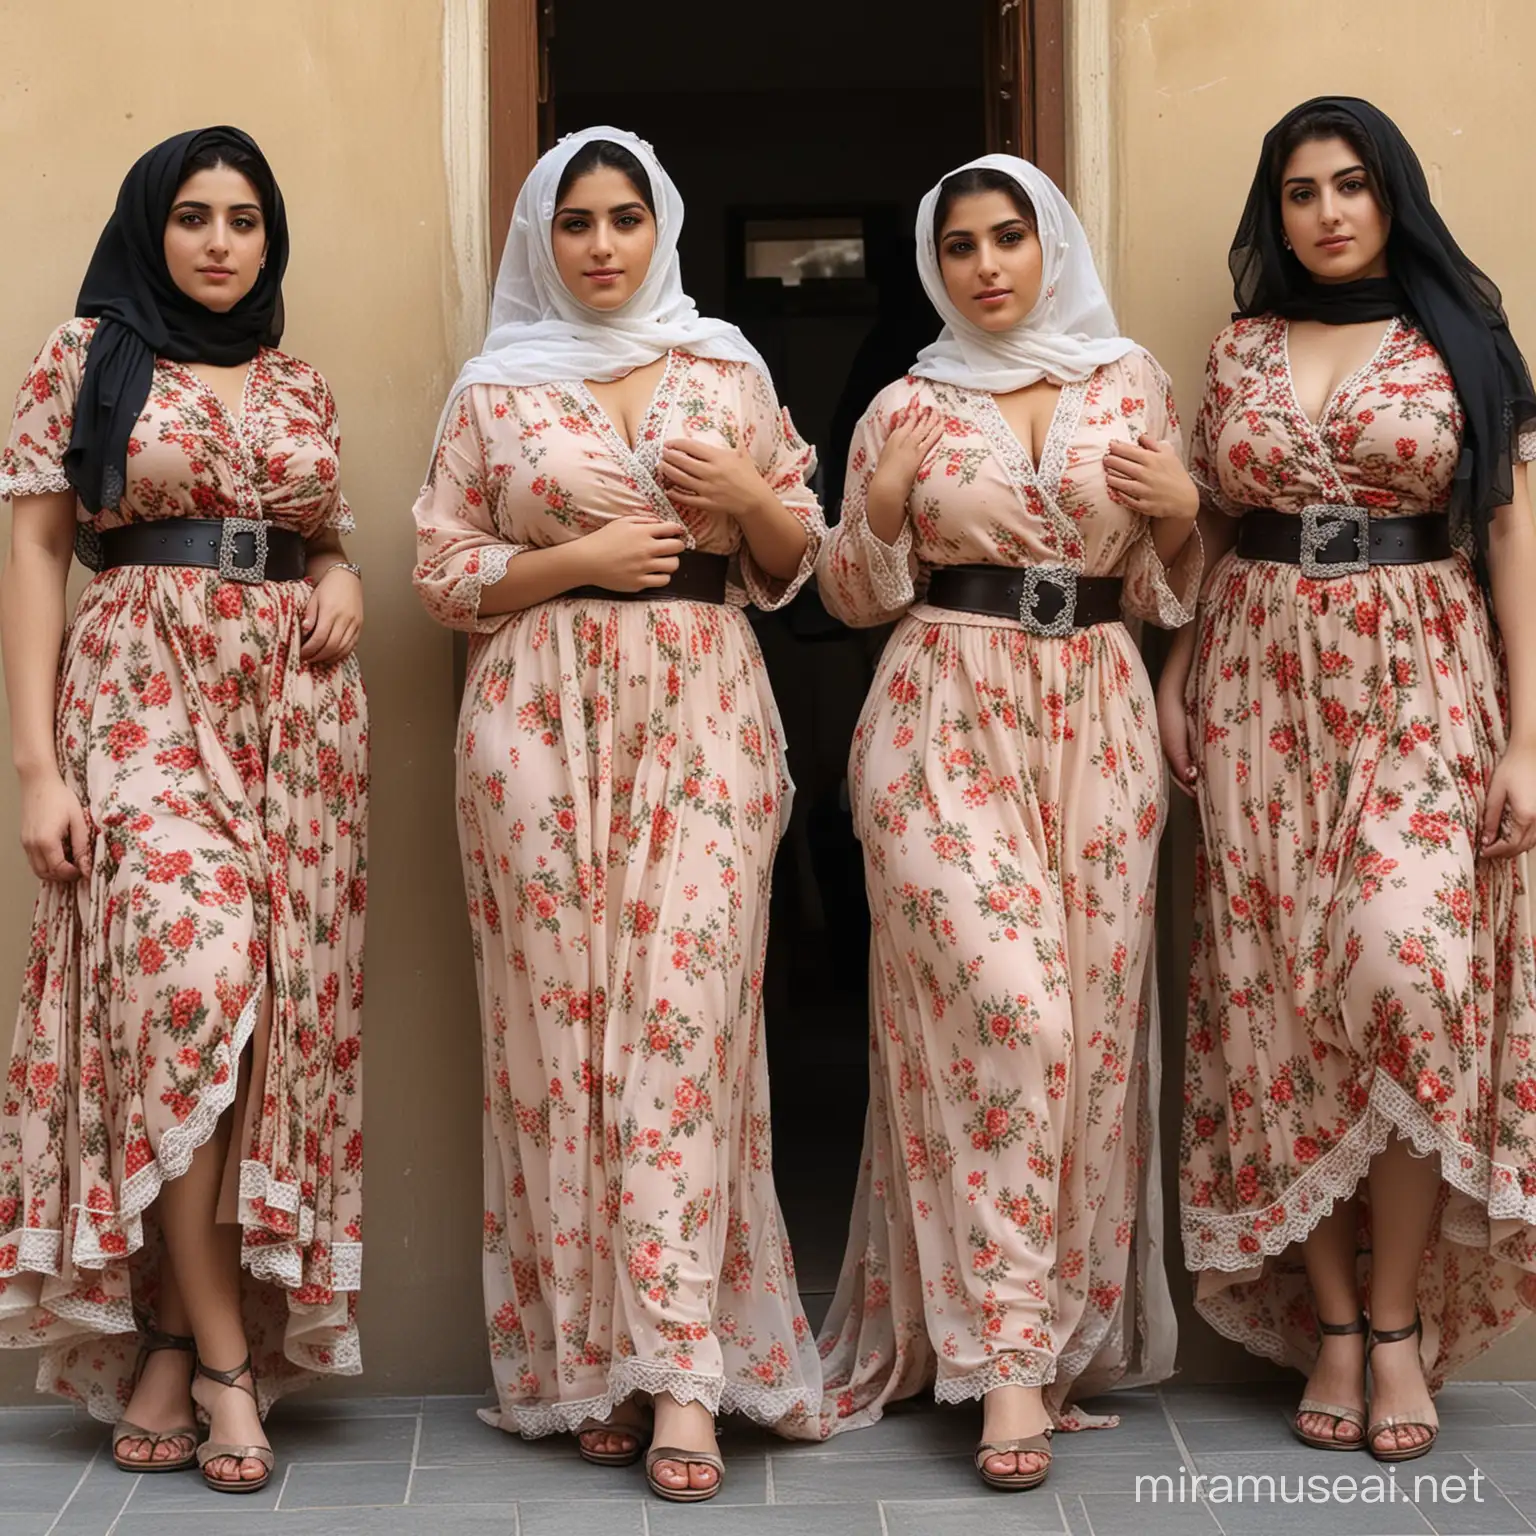 Iranian Women in Flowery Dresses with Waist Belts and Sandals